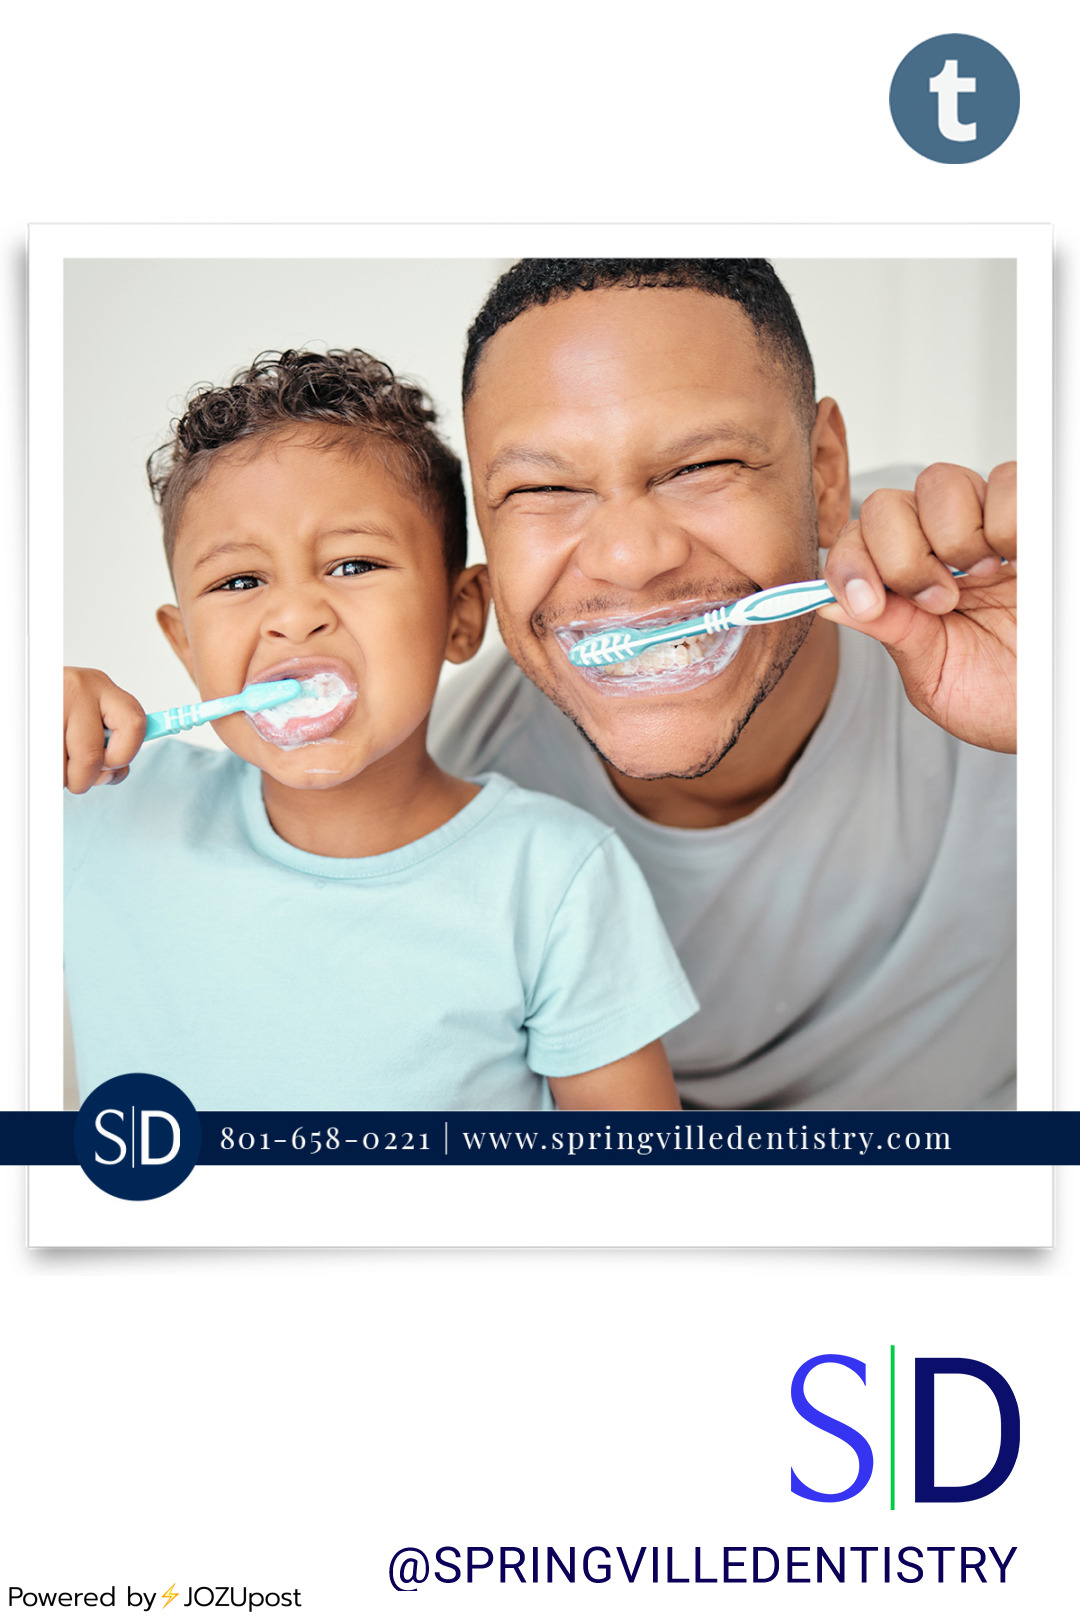 Good dental habits start young.
At Springville Dentistry, we emphasize the importance of brushing your teeth early.
This practice ensures a lifetime of healthy smiles.
Brushing is more than maintaining a bright smile; it prevents dental issues.
Even...